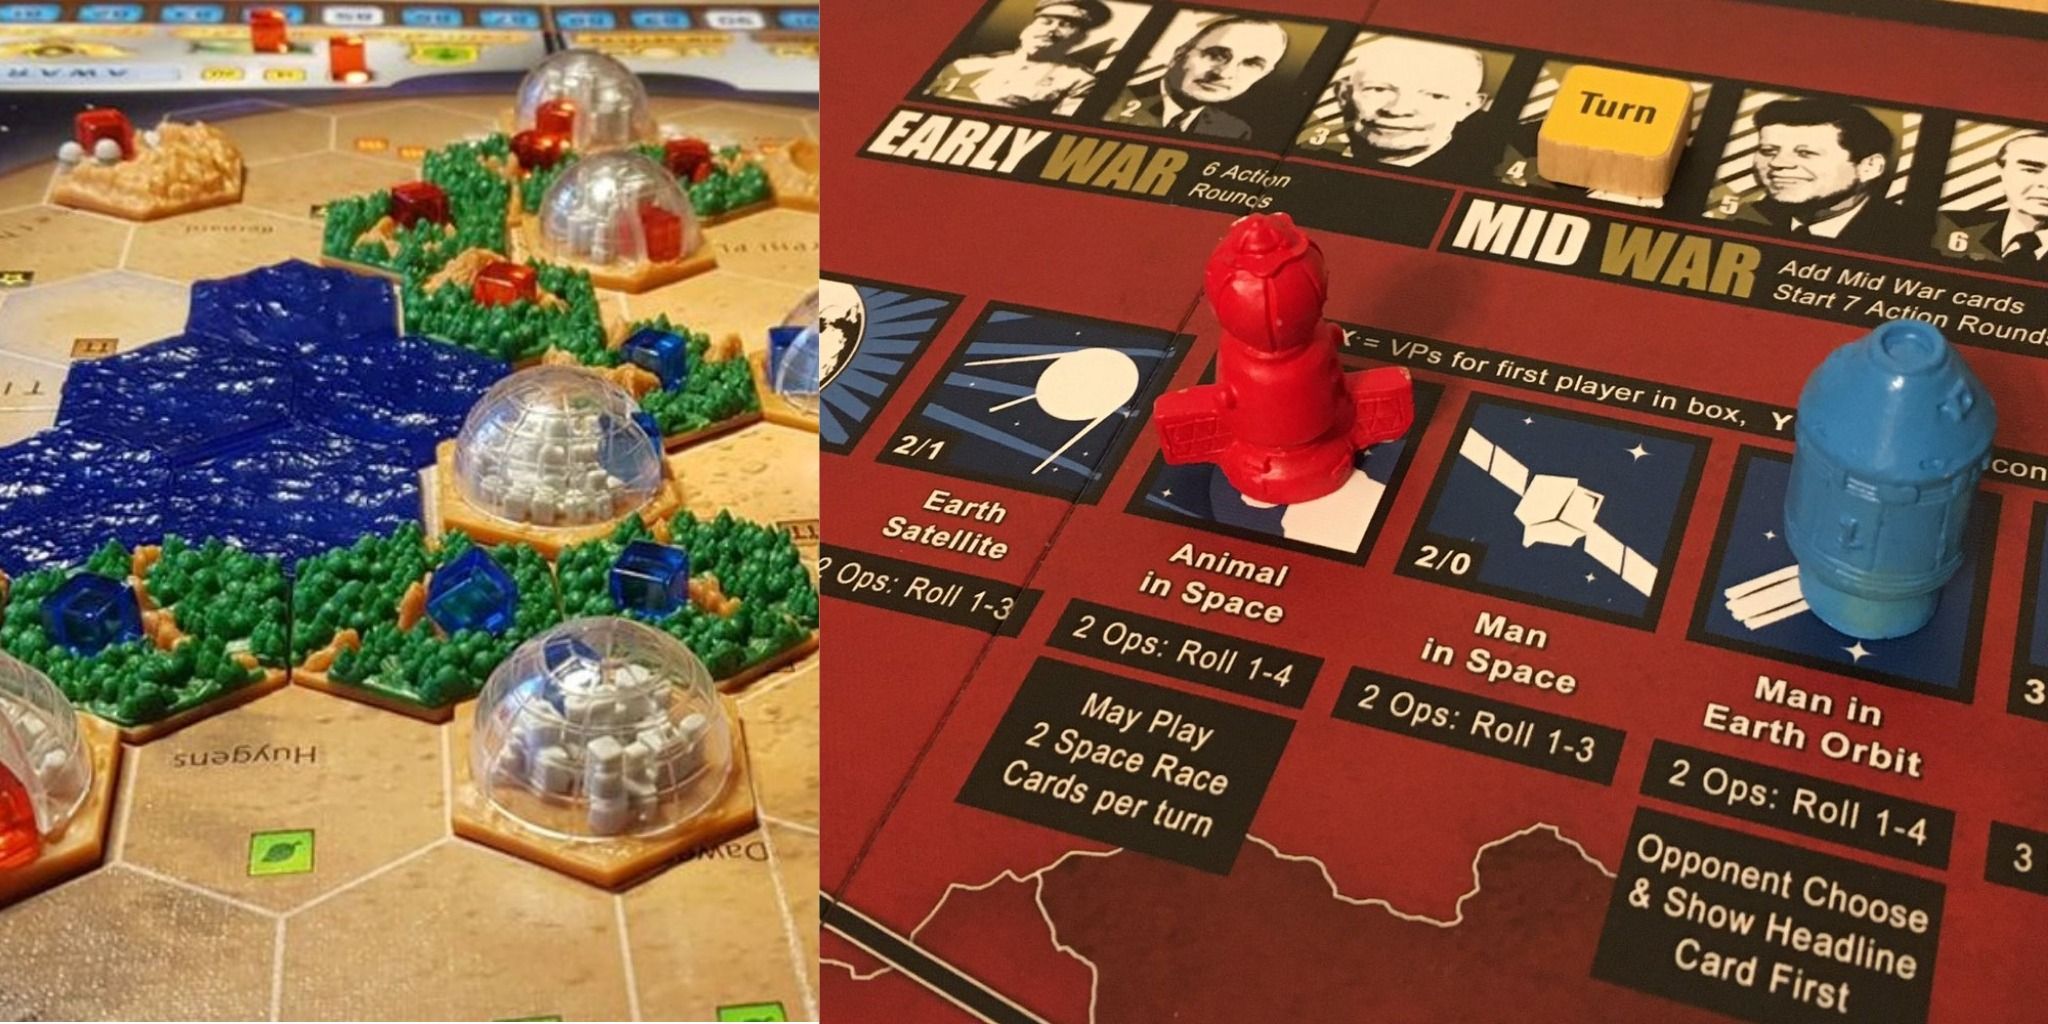 Luxe board games are selling out after spike in popularity